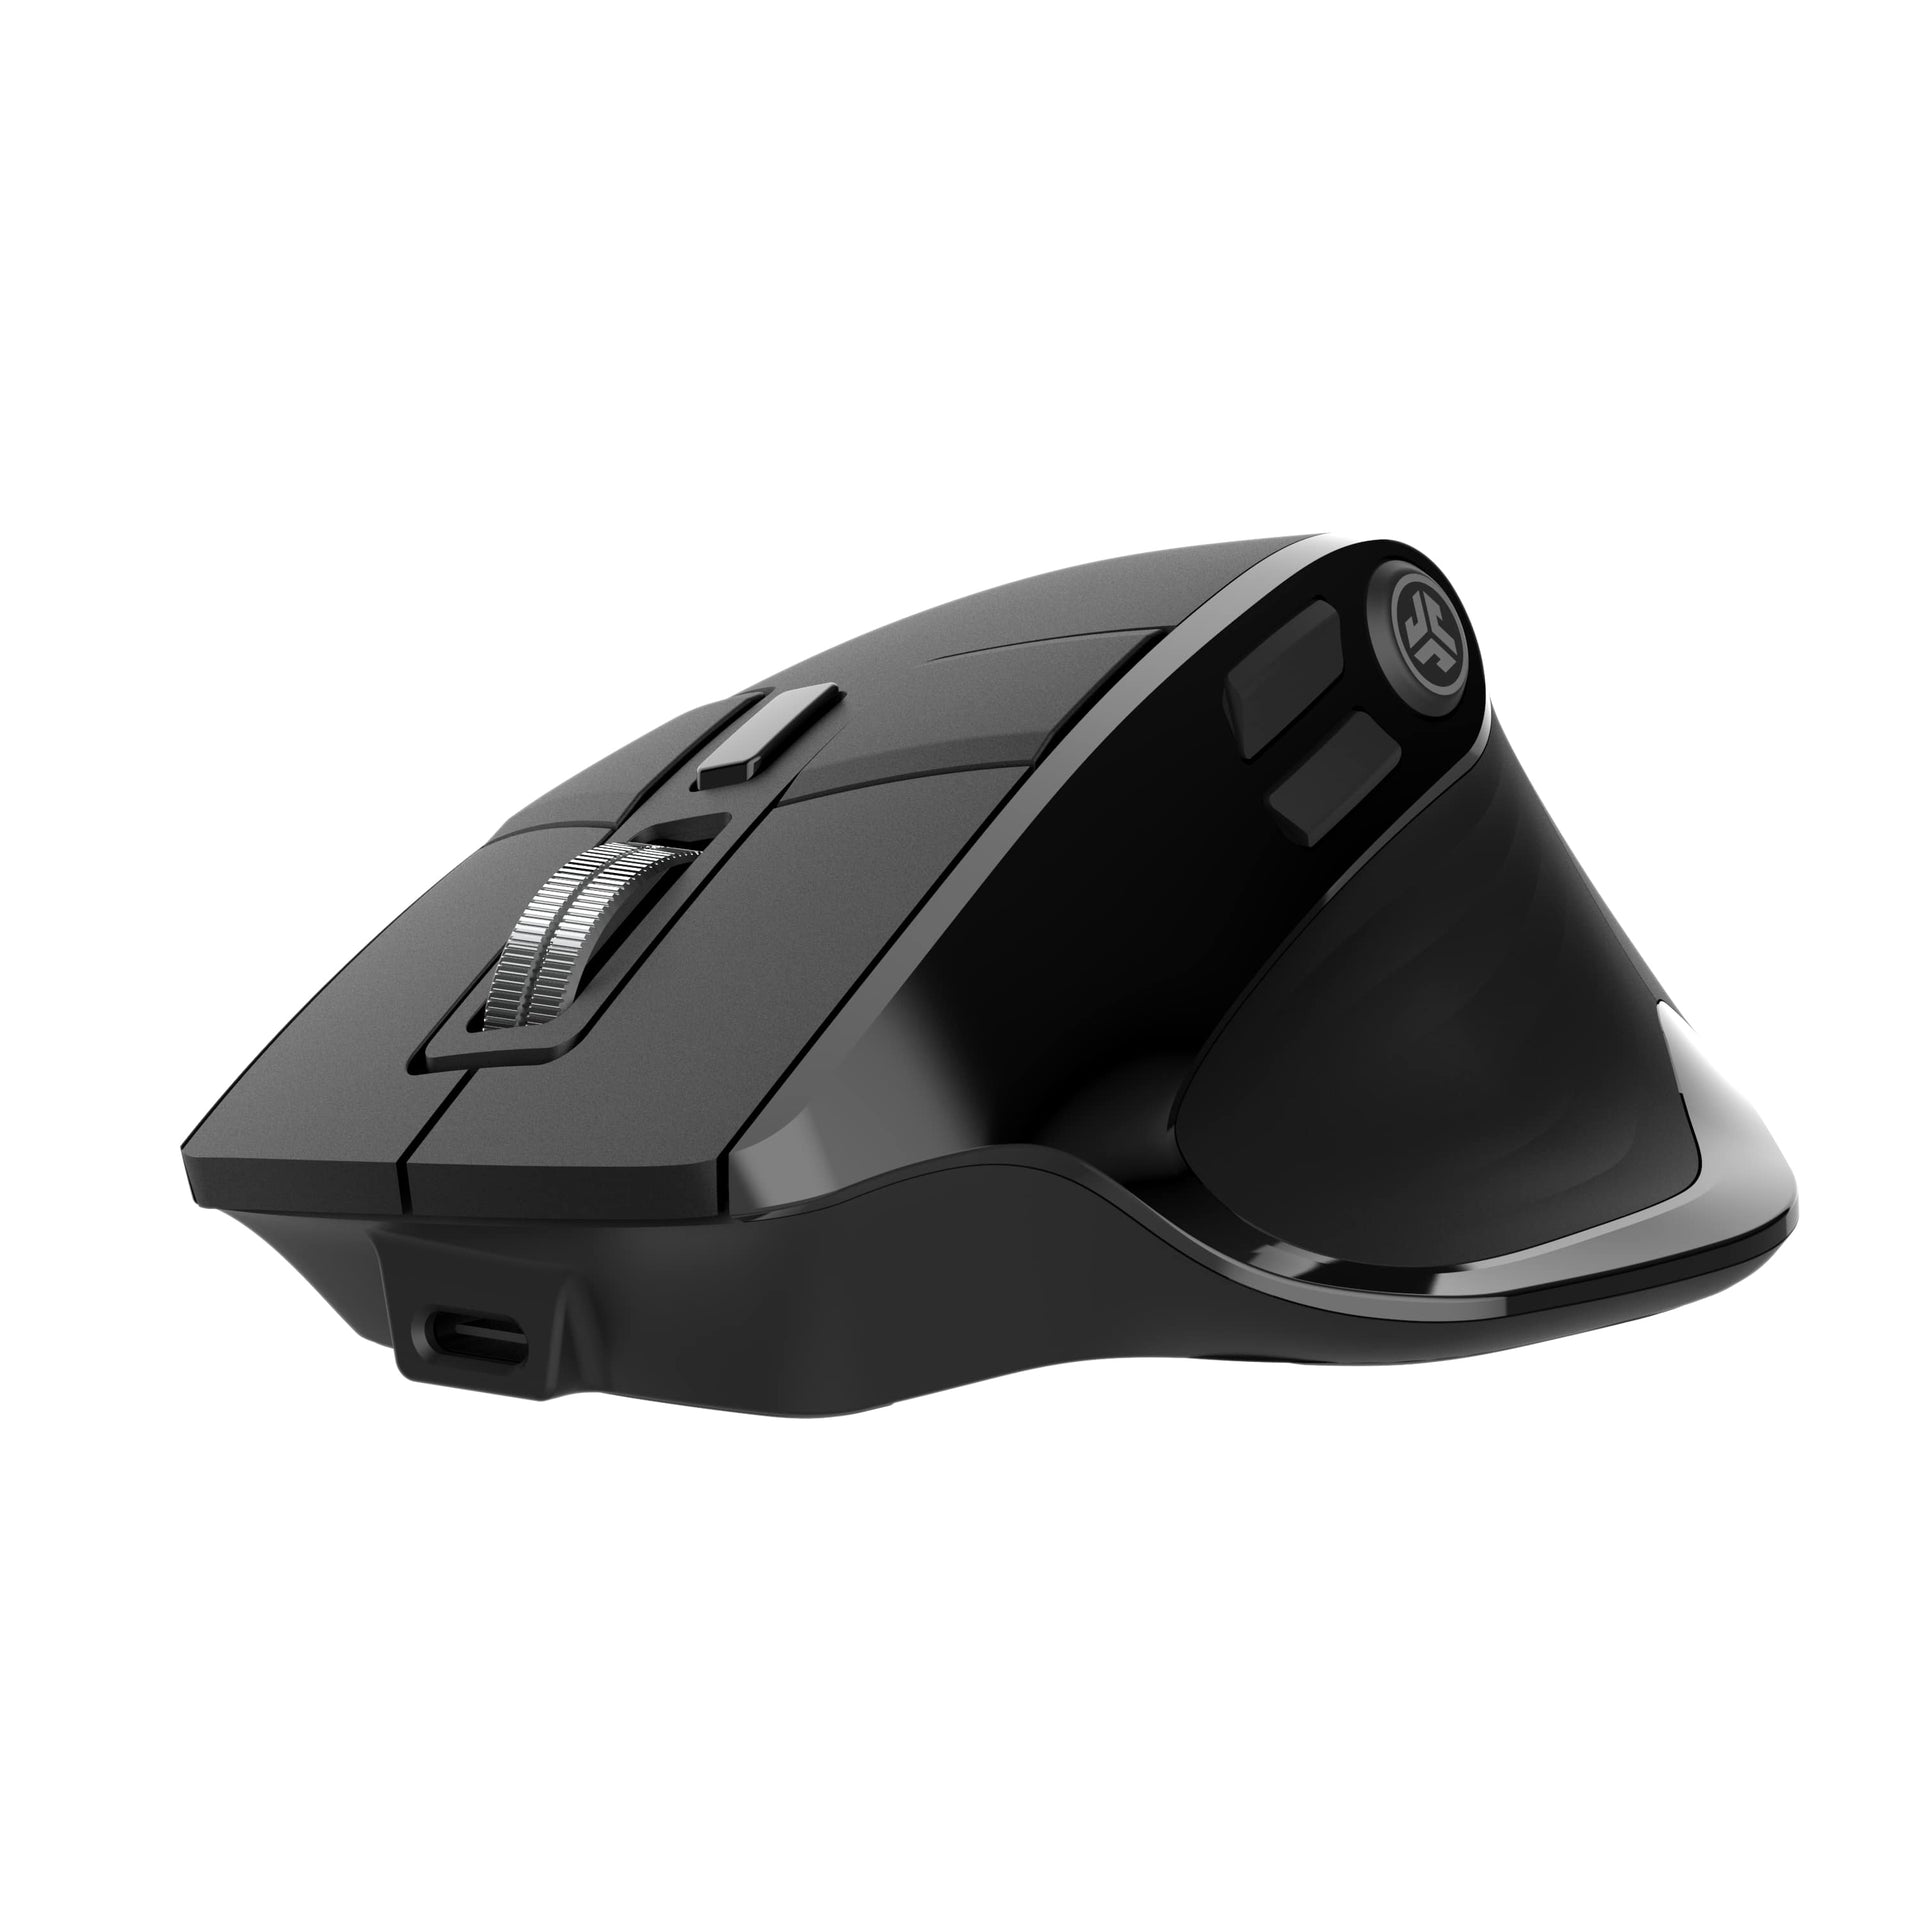 PRO FIT 2.4GHZ WIRELESS FULL-SIZE MOUSE - BLACK